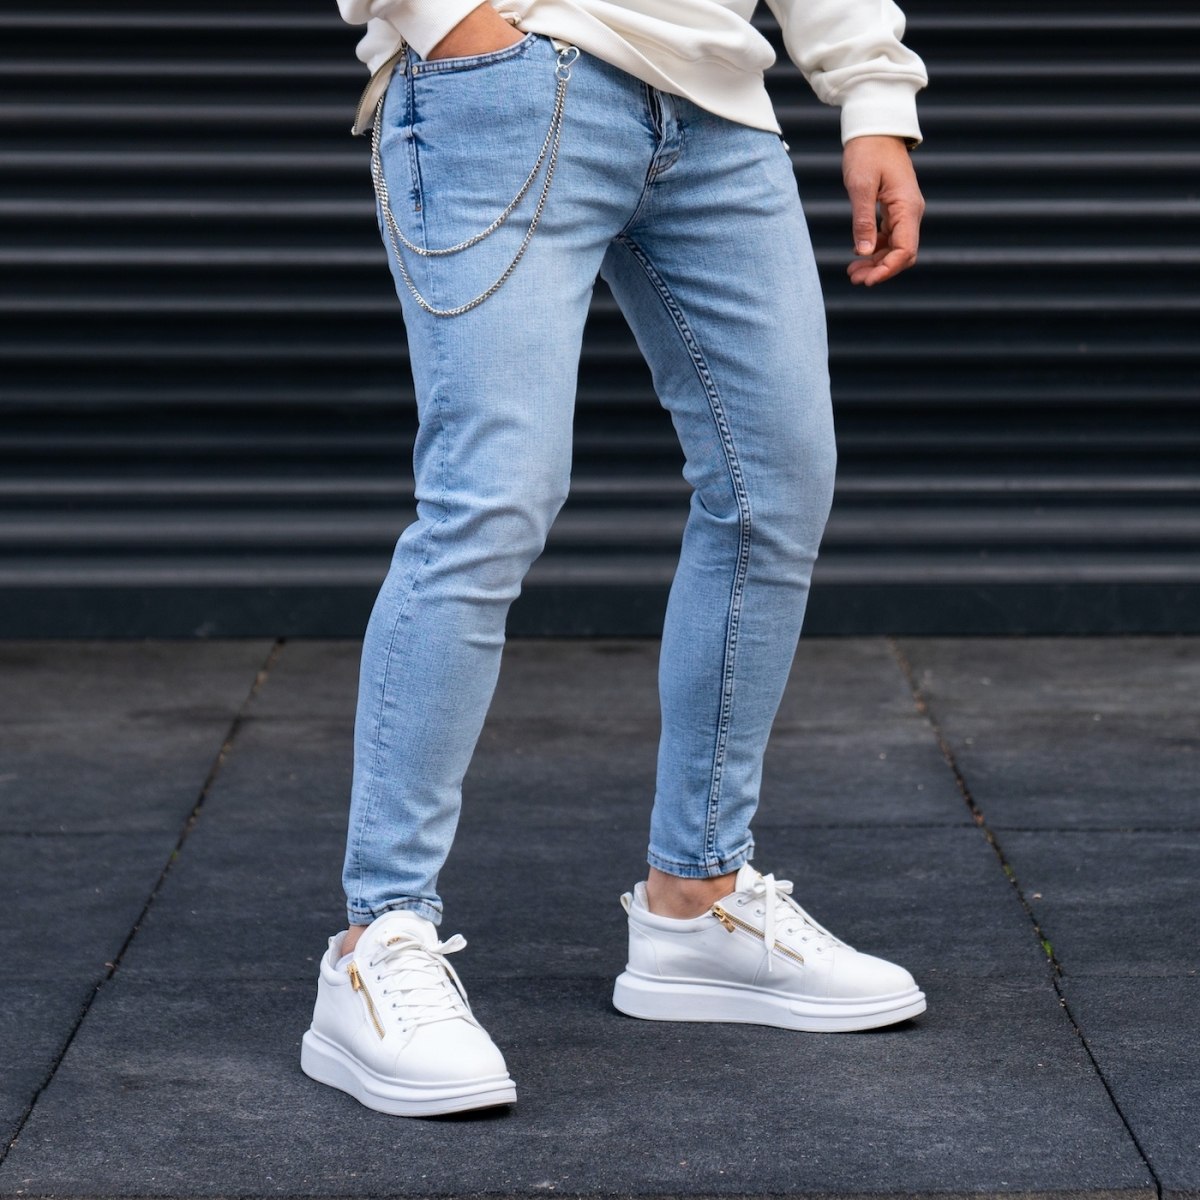 Men's Basic Ice Blue Jeans with Chain | Martin Valen